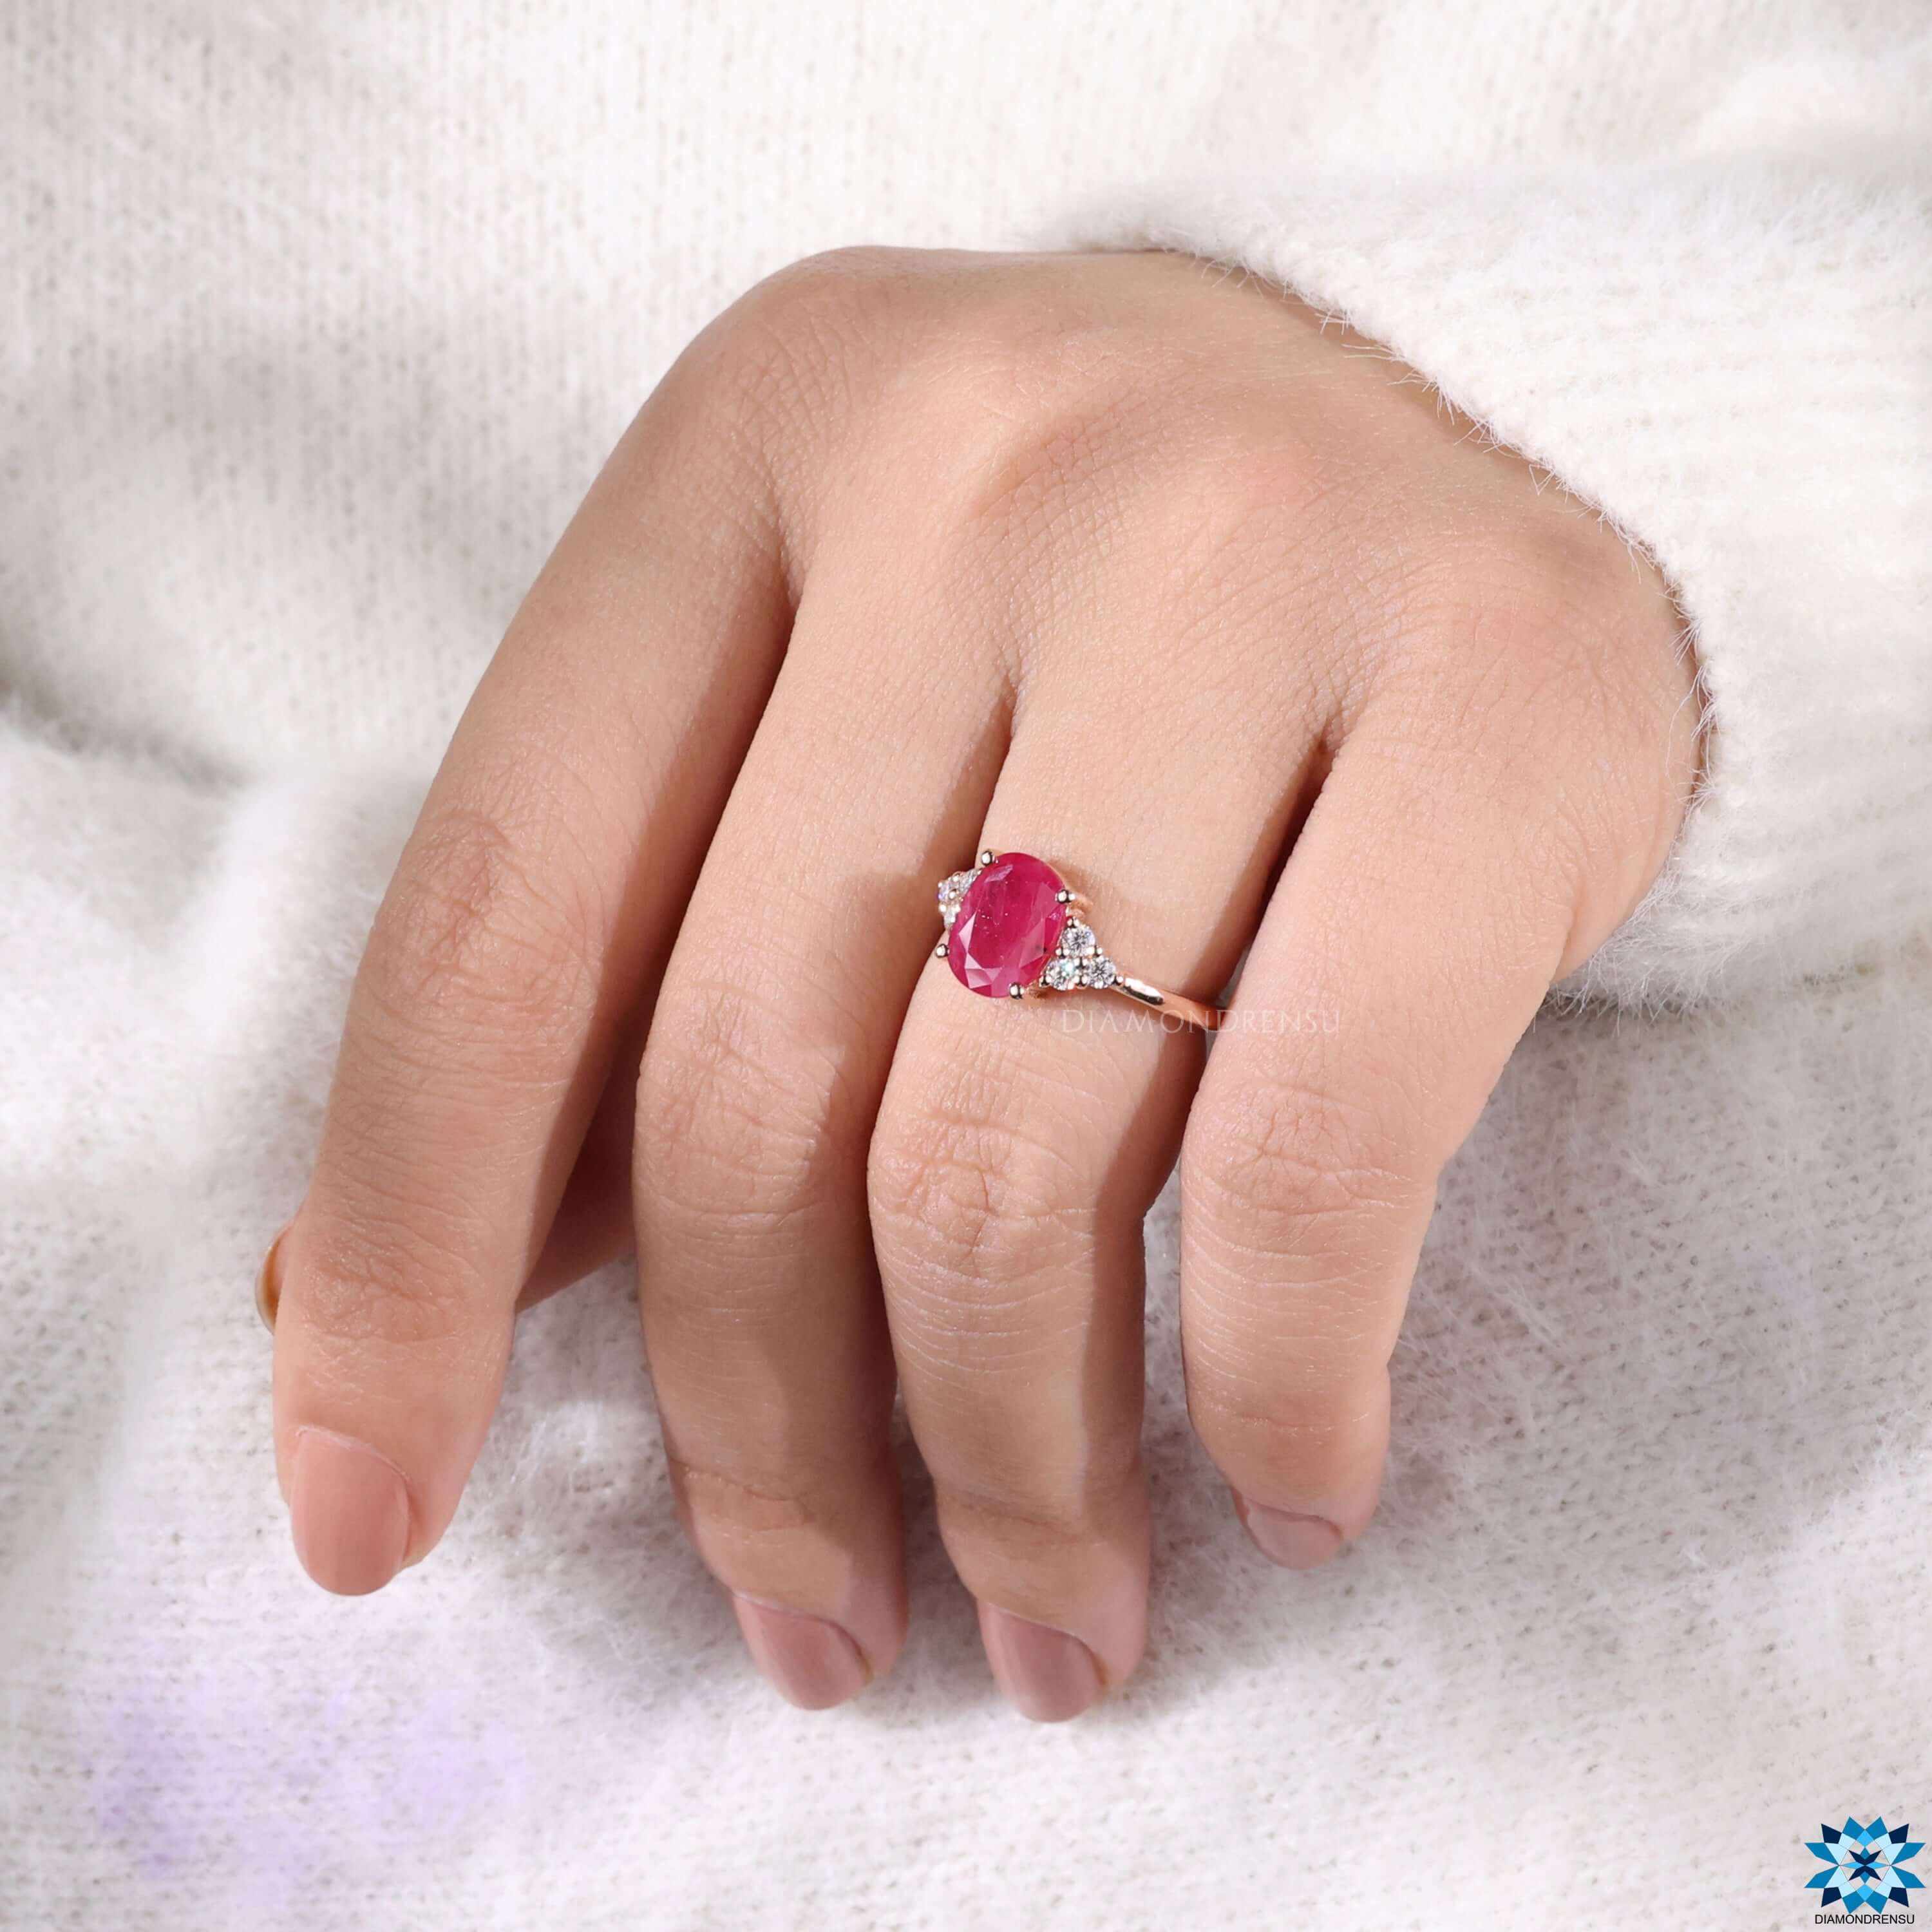 Buy 14k Gold Oval Ruby Ring, Ruby Engagement Ring, Gold Ruby Ring, Bezel  Set Ruby Ring, Oval Solitaire Ring Online in India - Etsy